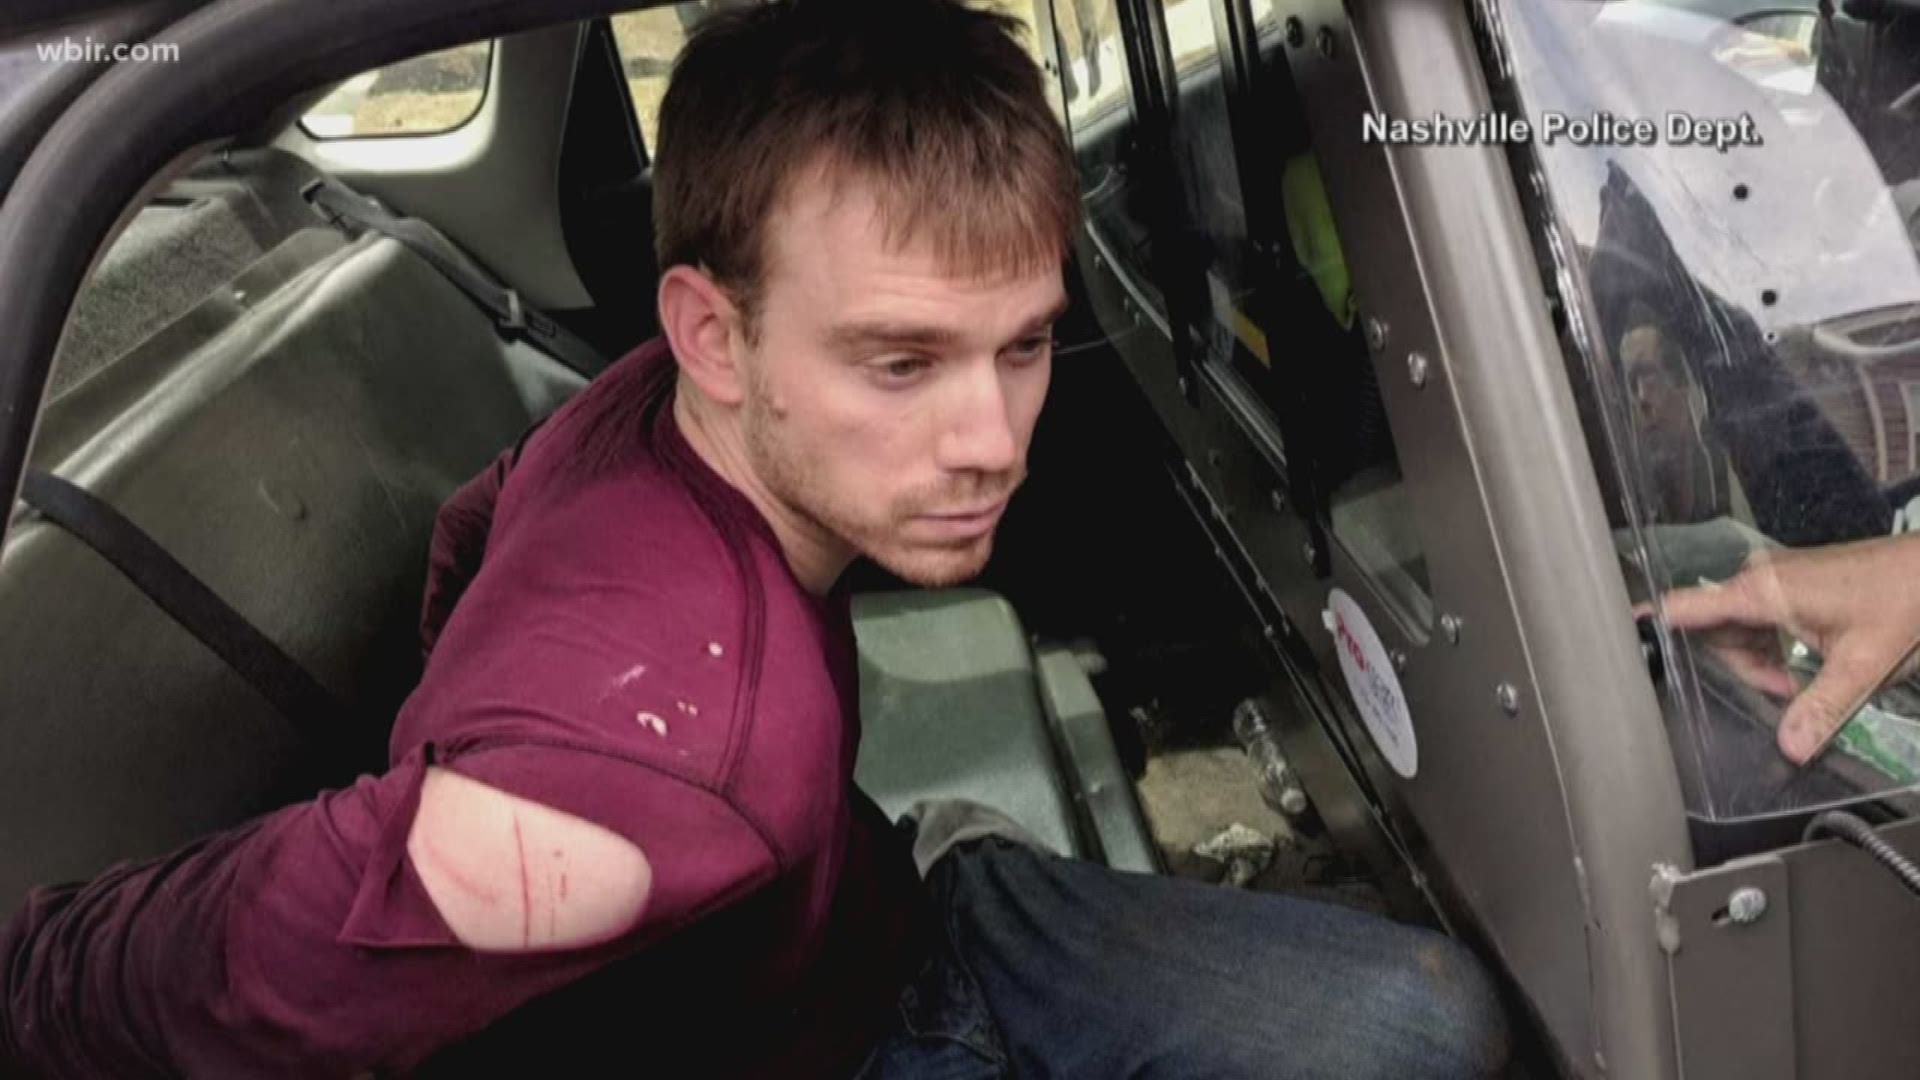 Metro police announced Monday afternoon that Travis Reinking, the suspect in a shooting that killed four people at an Antioch Waffle House, had been arrested after a 34-hour manhunt.